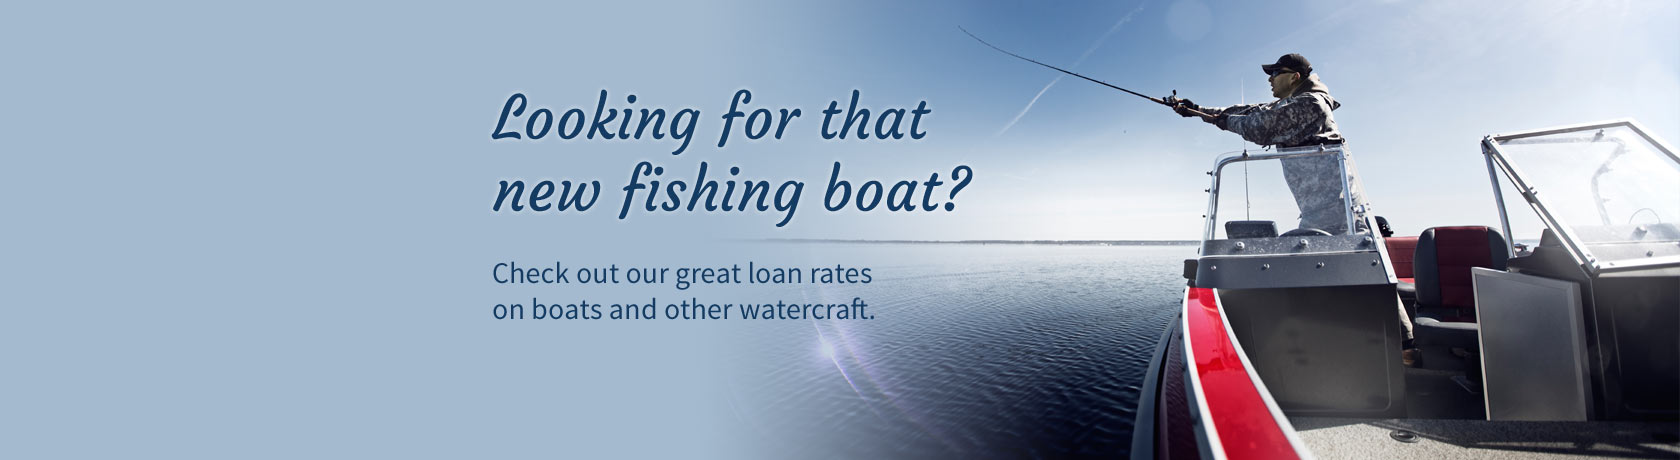 Looking for that new fishing boat? Check out our great loan rates on boats and other watercraft.